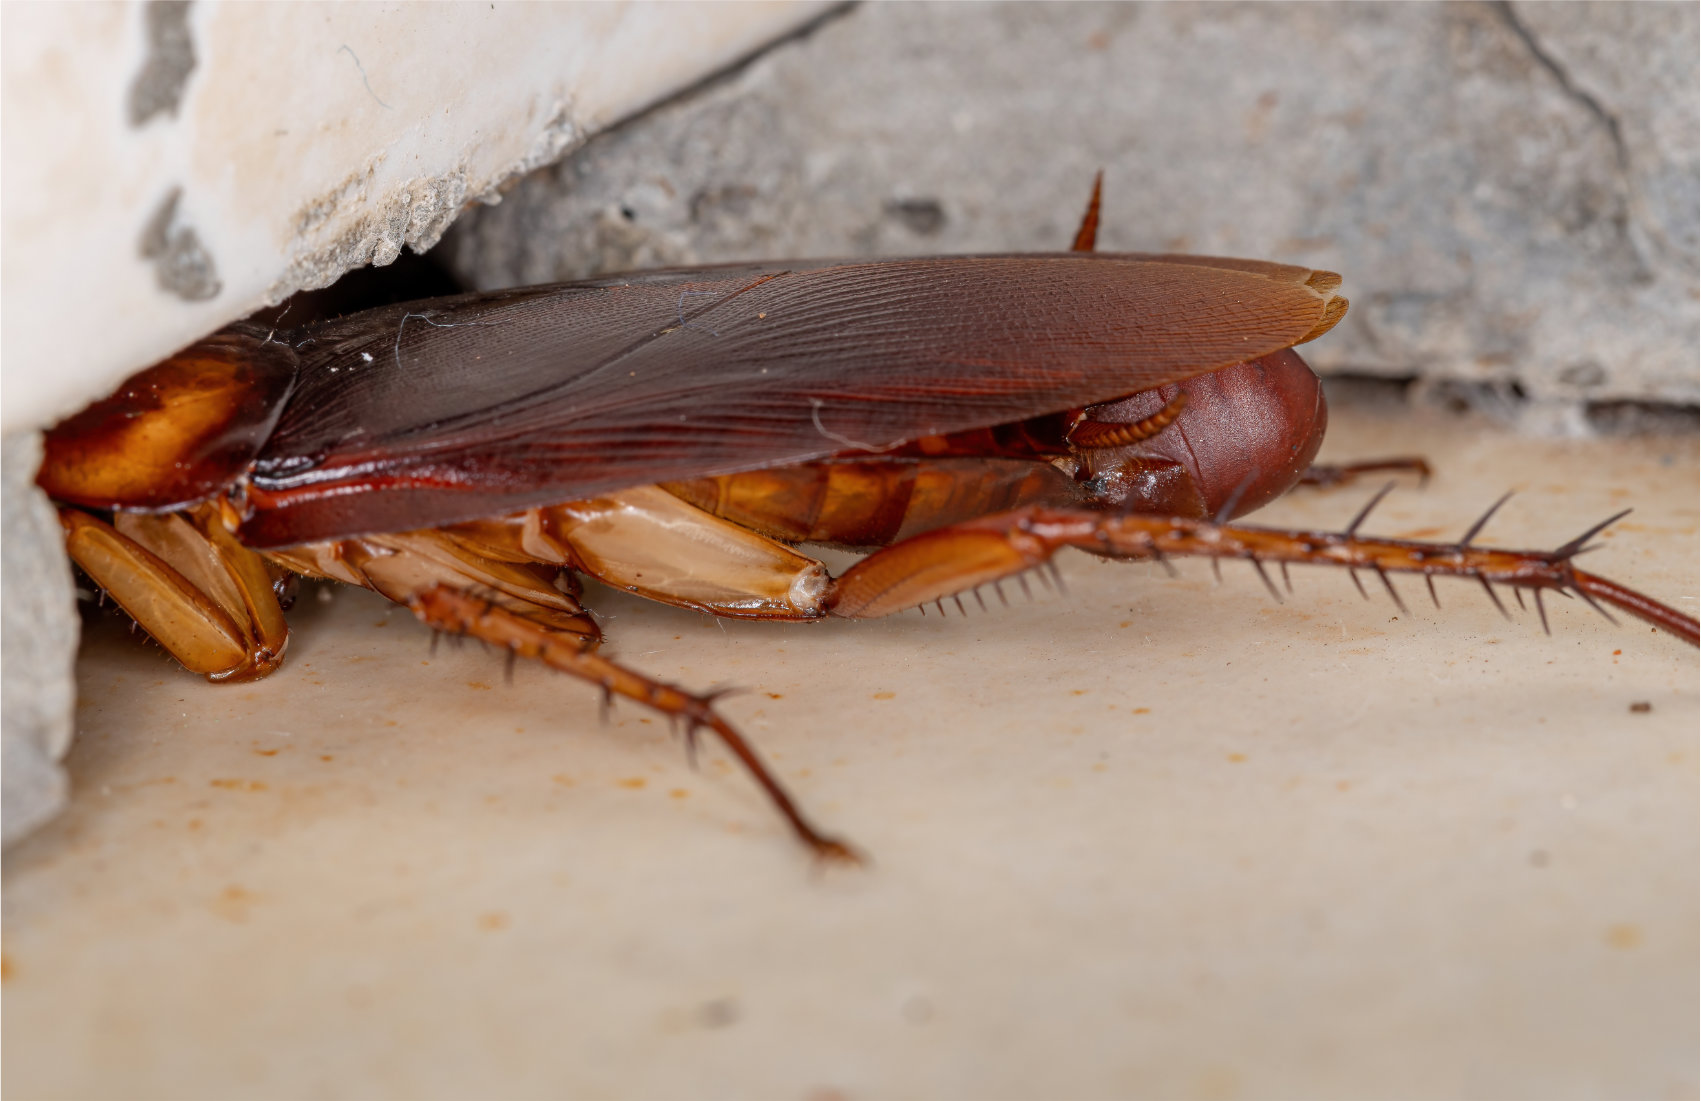 An image of an American cockroach with an egg capsule attached to its abdomen.